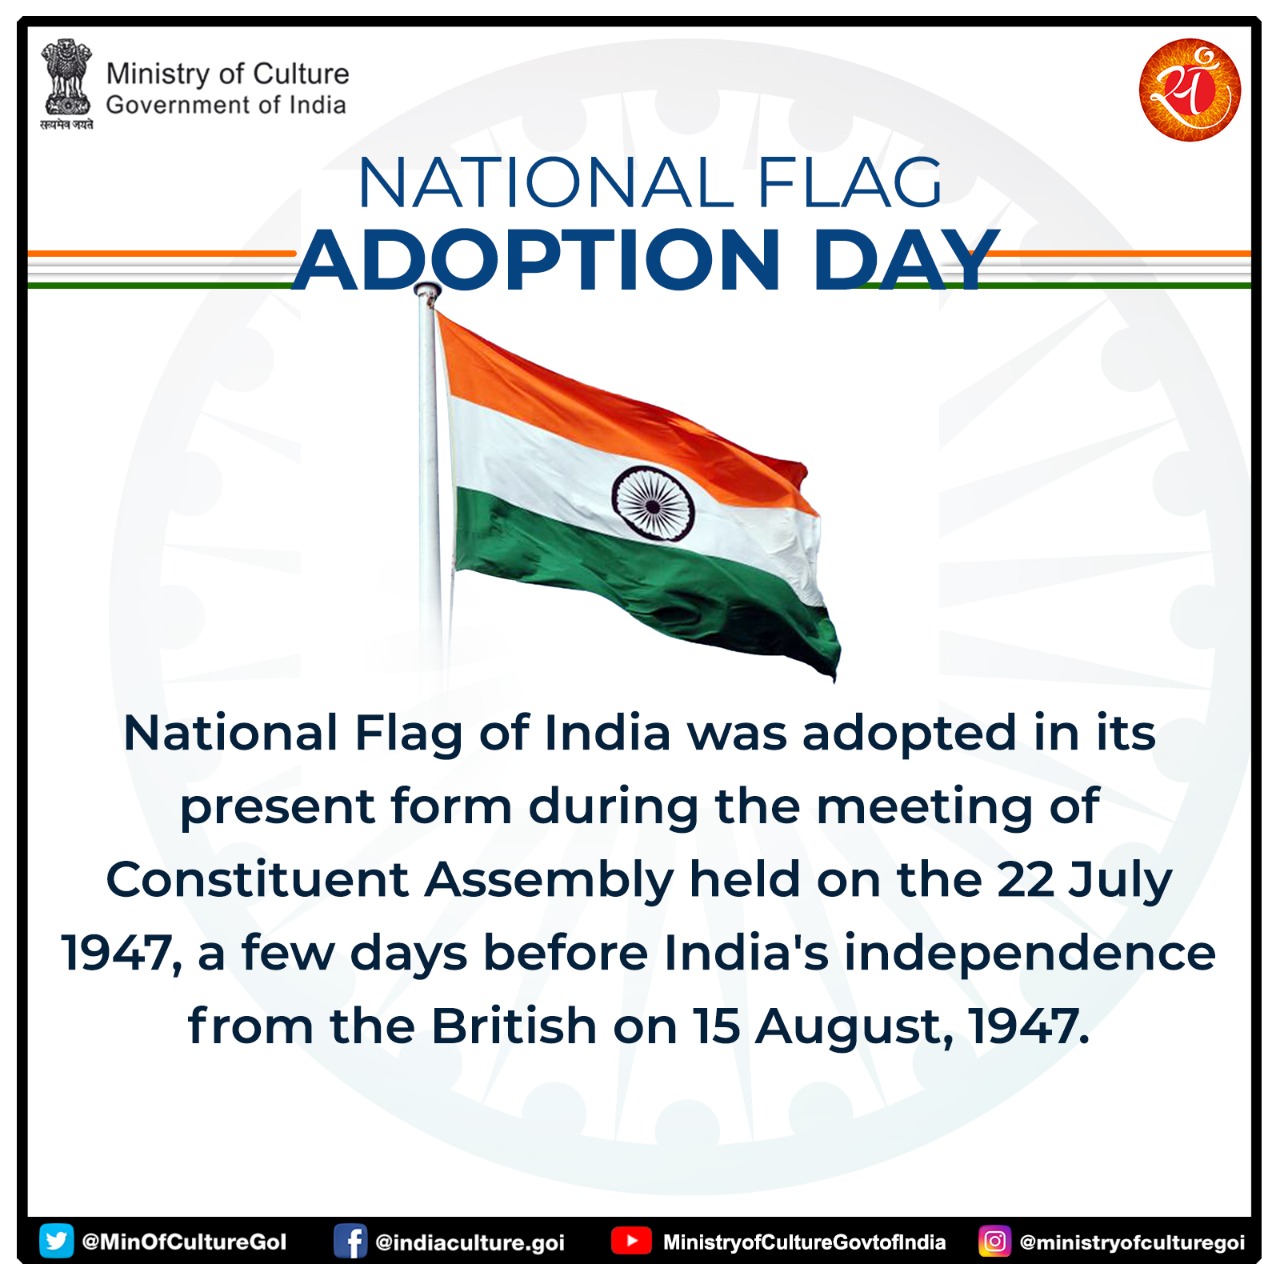 Ministry Of Culture On Twitter Greetings On National Flag Adoption Day The National Flag Of India Was Adopted In Its Present Form During The Meeting Of The Constituent Assembly Held On 22